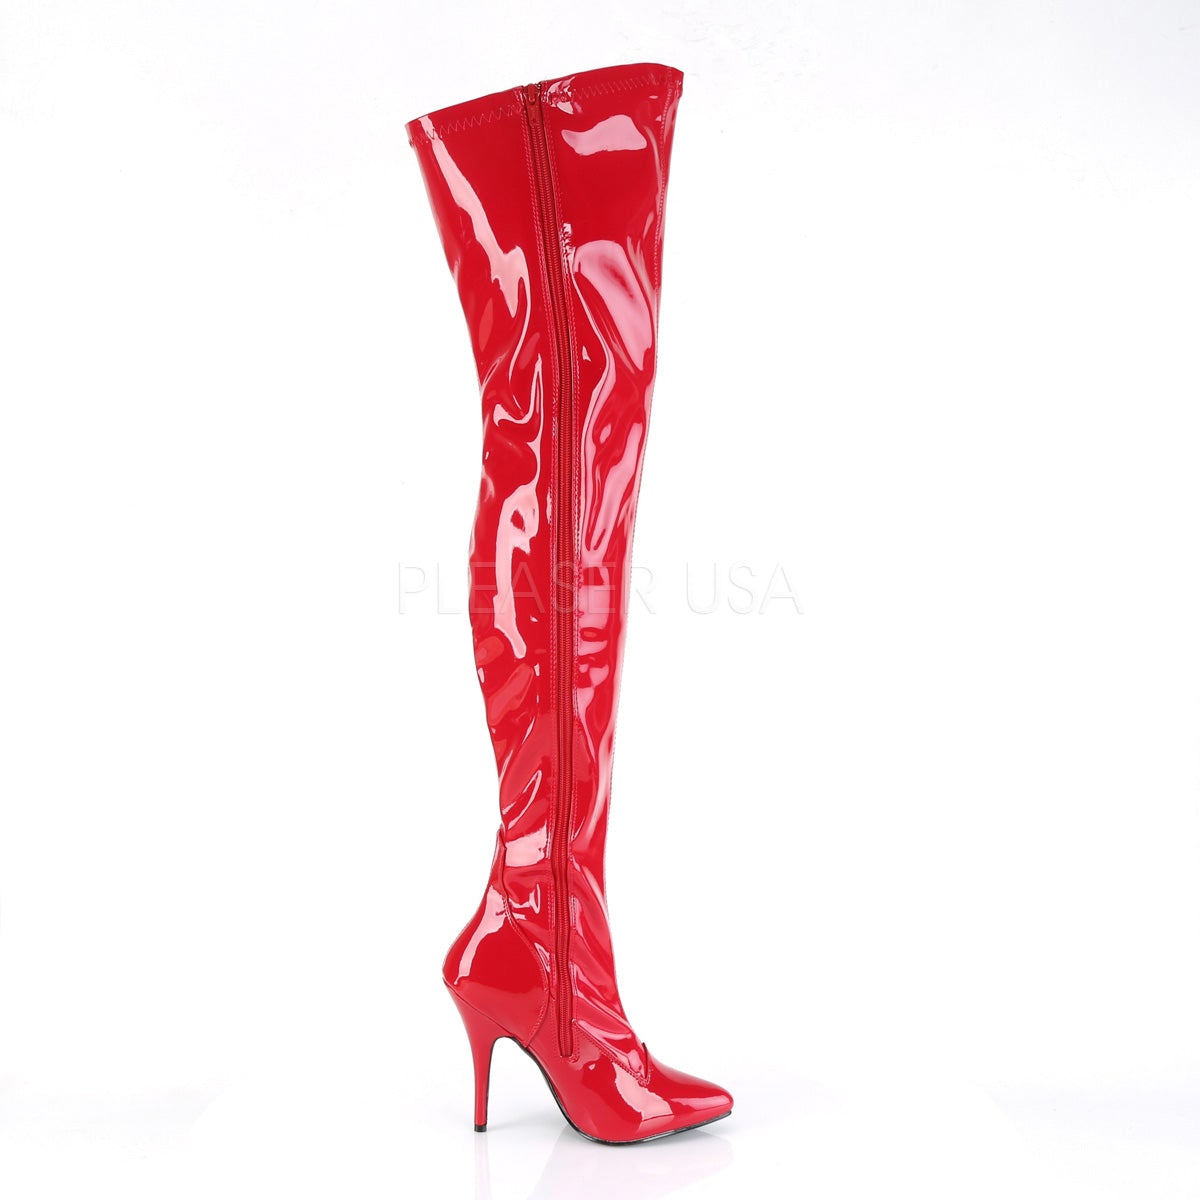 red dominatrix boots